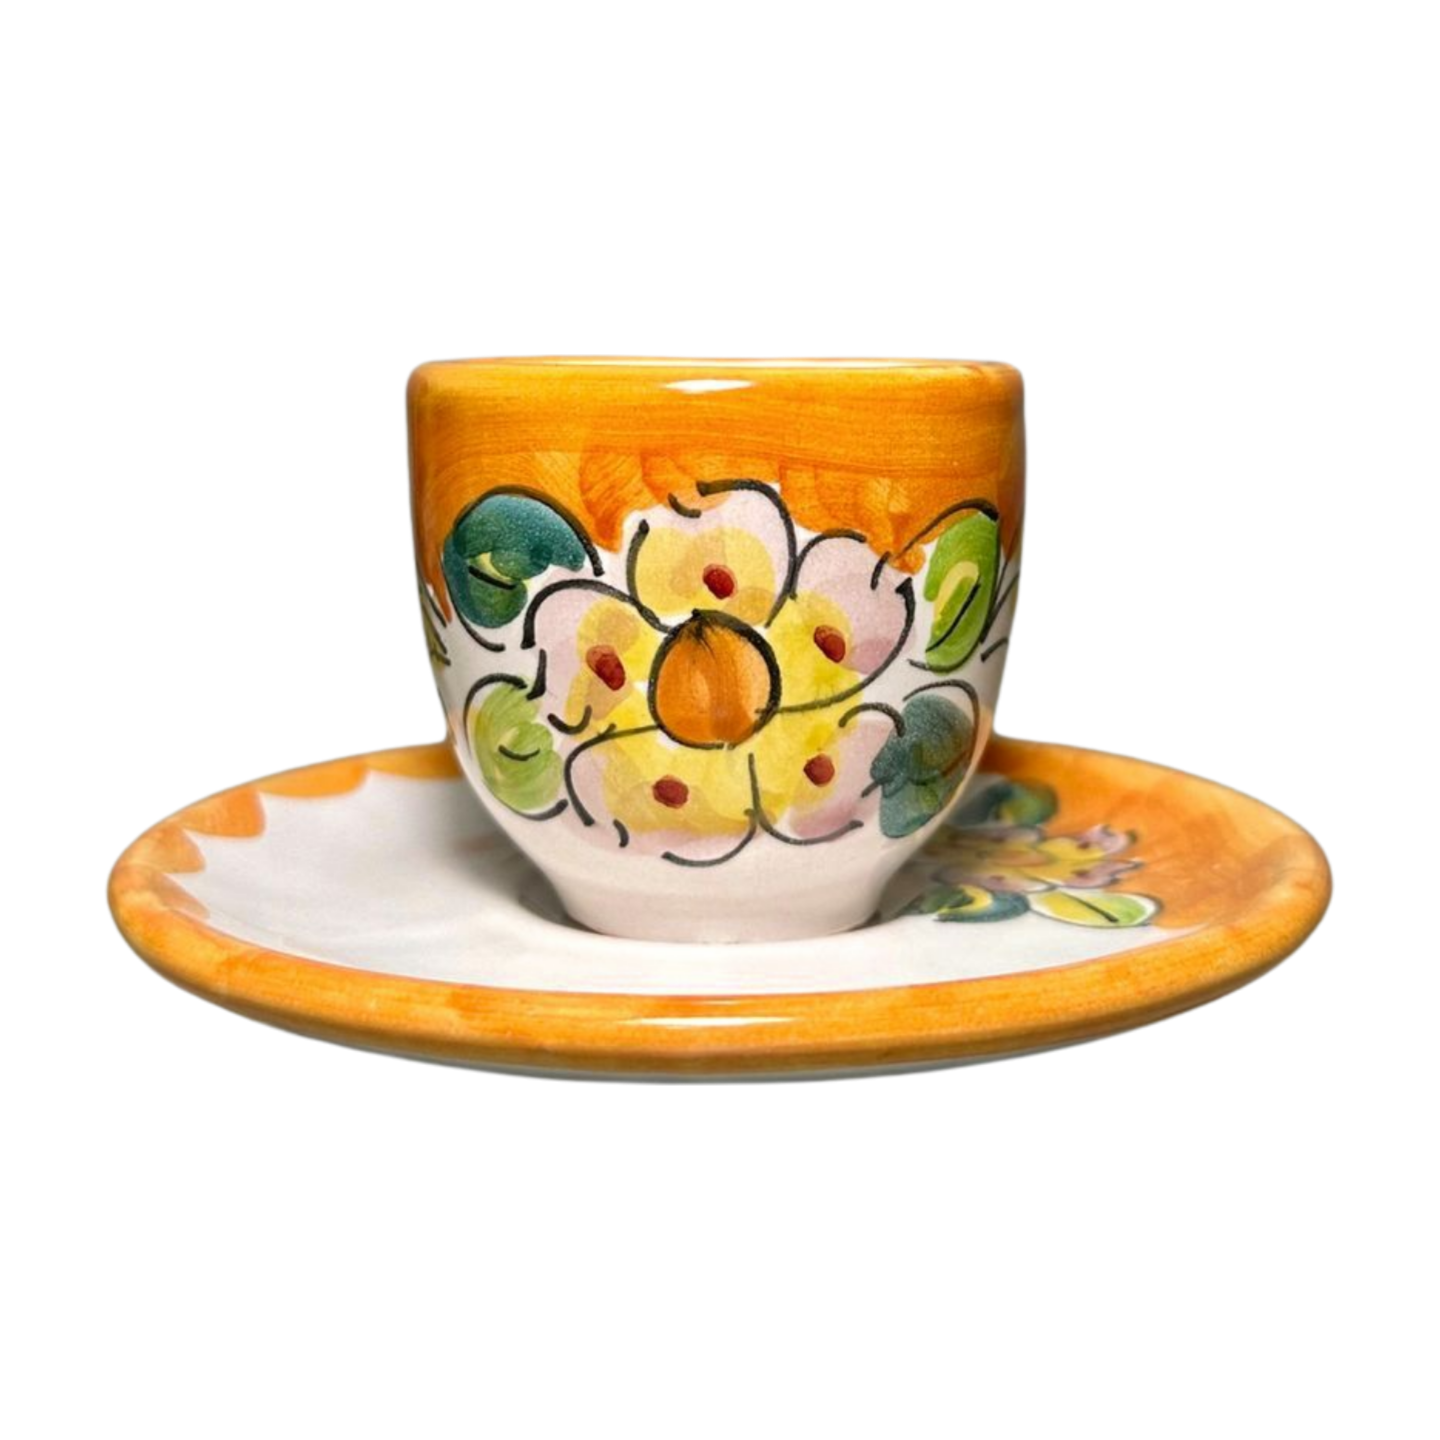 Italian espresso cup and saucer set, featuring a pink baroque flower design.